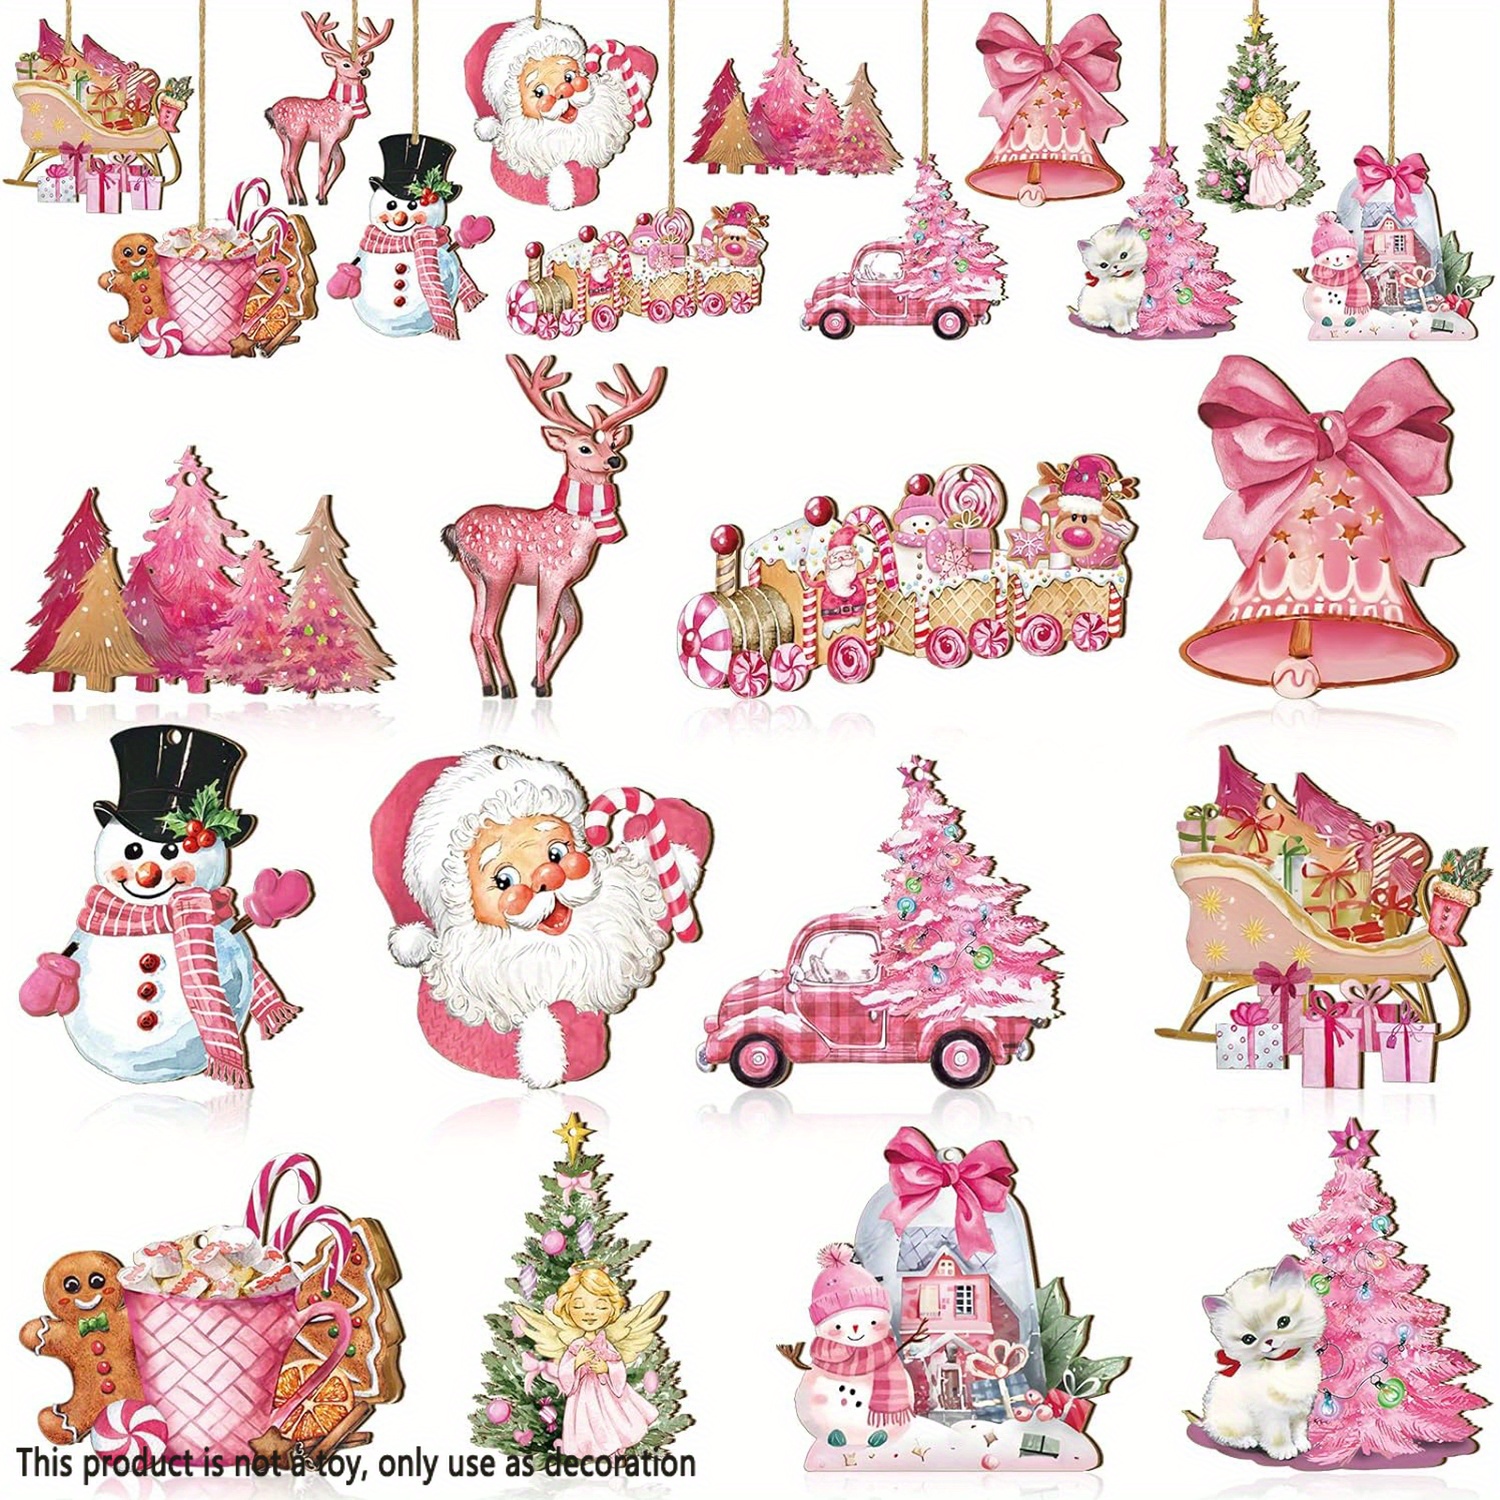 

24pcs, Christmas Pink Style Santa Claus Christmas Tree Elk Snowman Wooden Hanging Ornaments, Party Decor, Tree Decorations, Garden Yard Decoration, Holiday Supplies